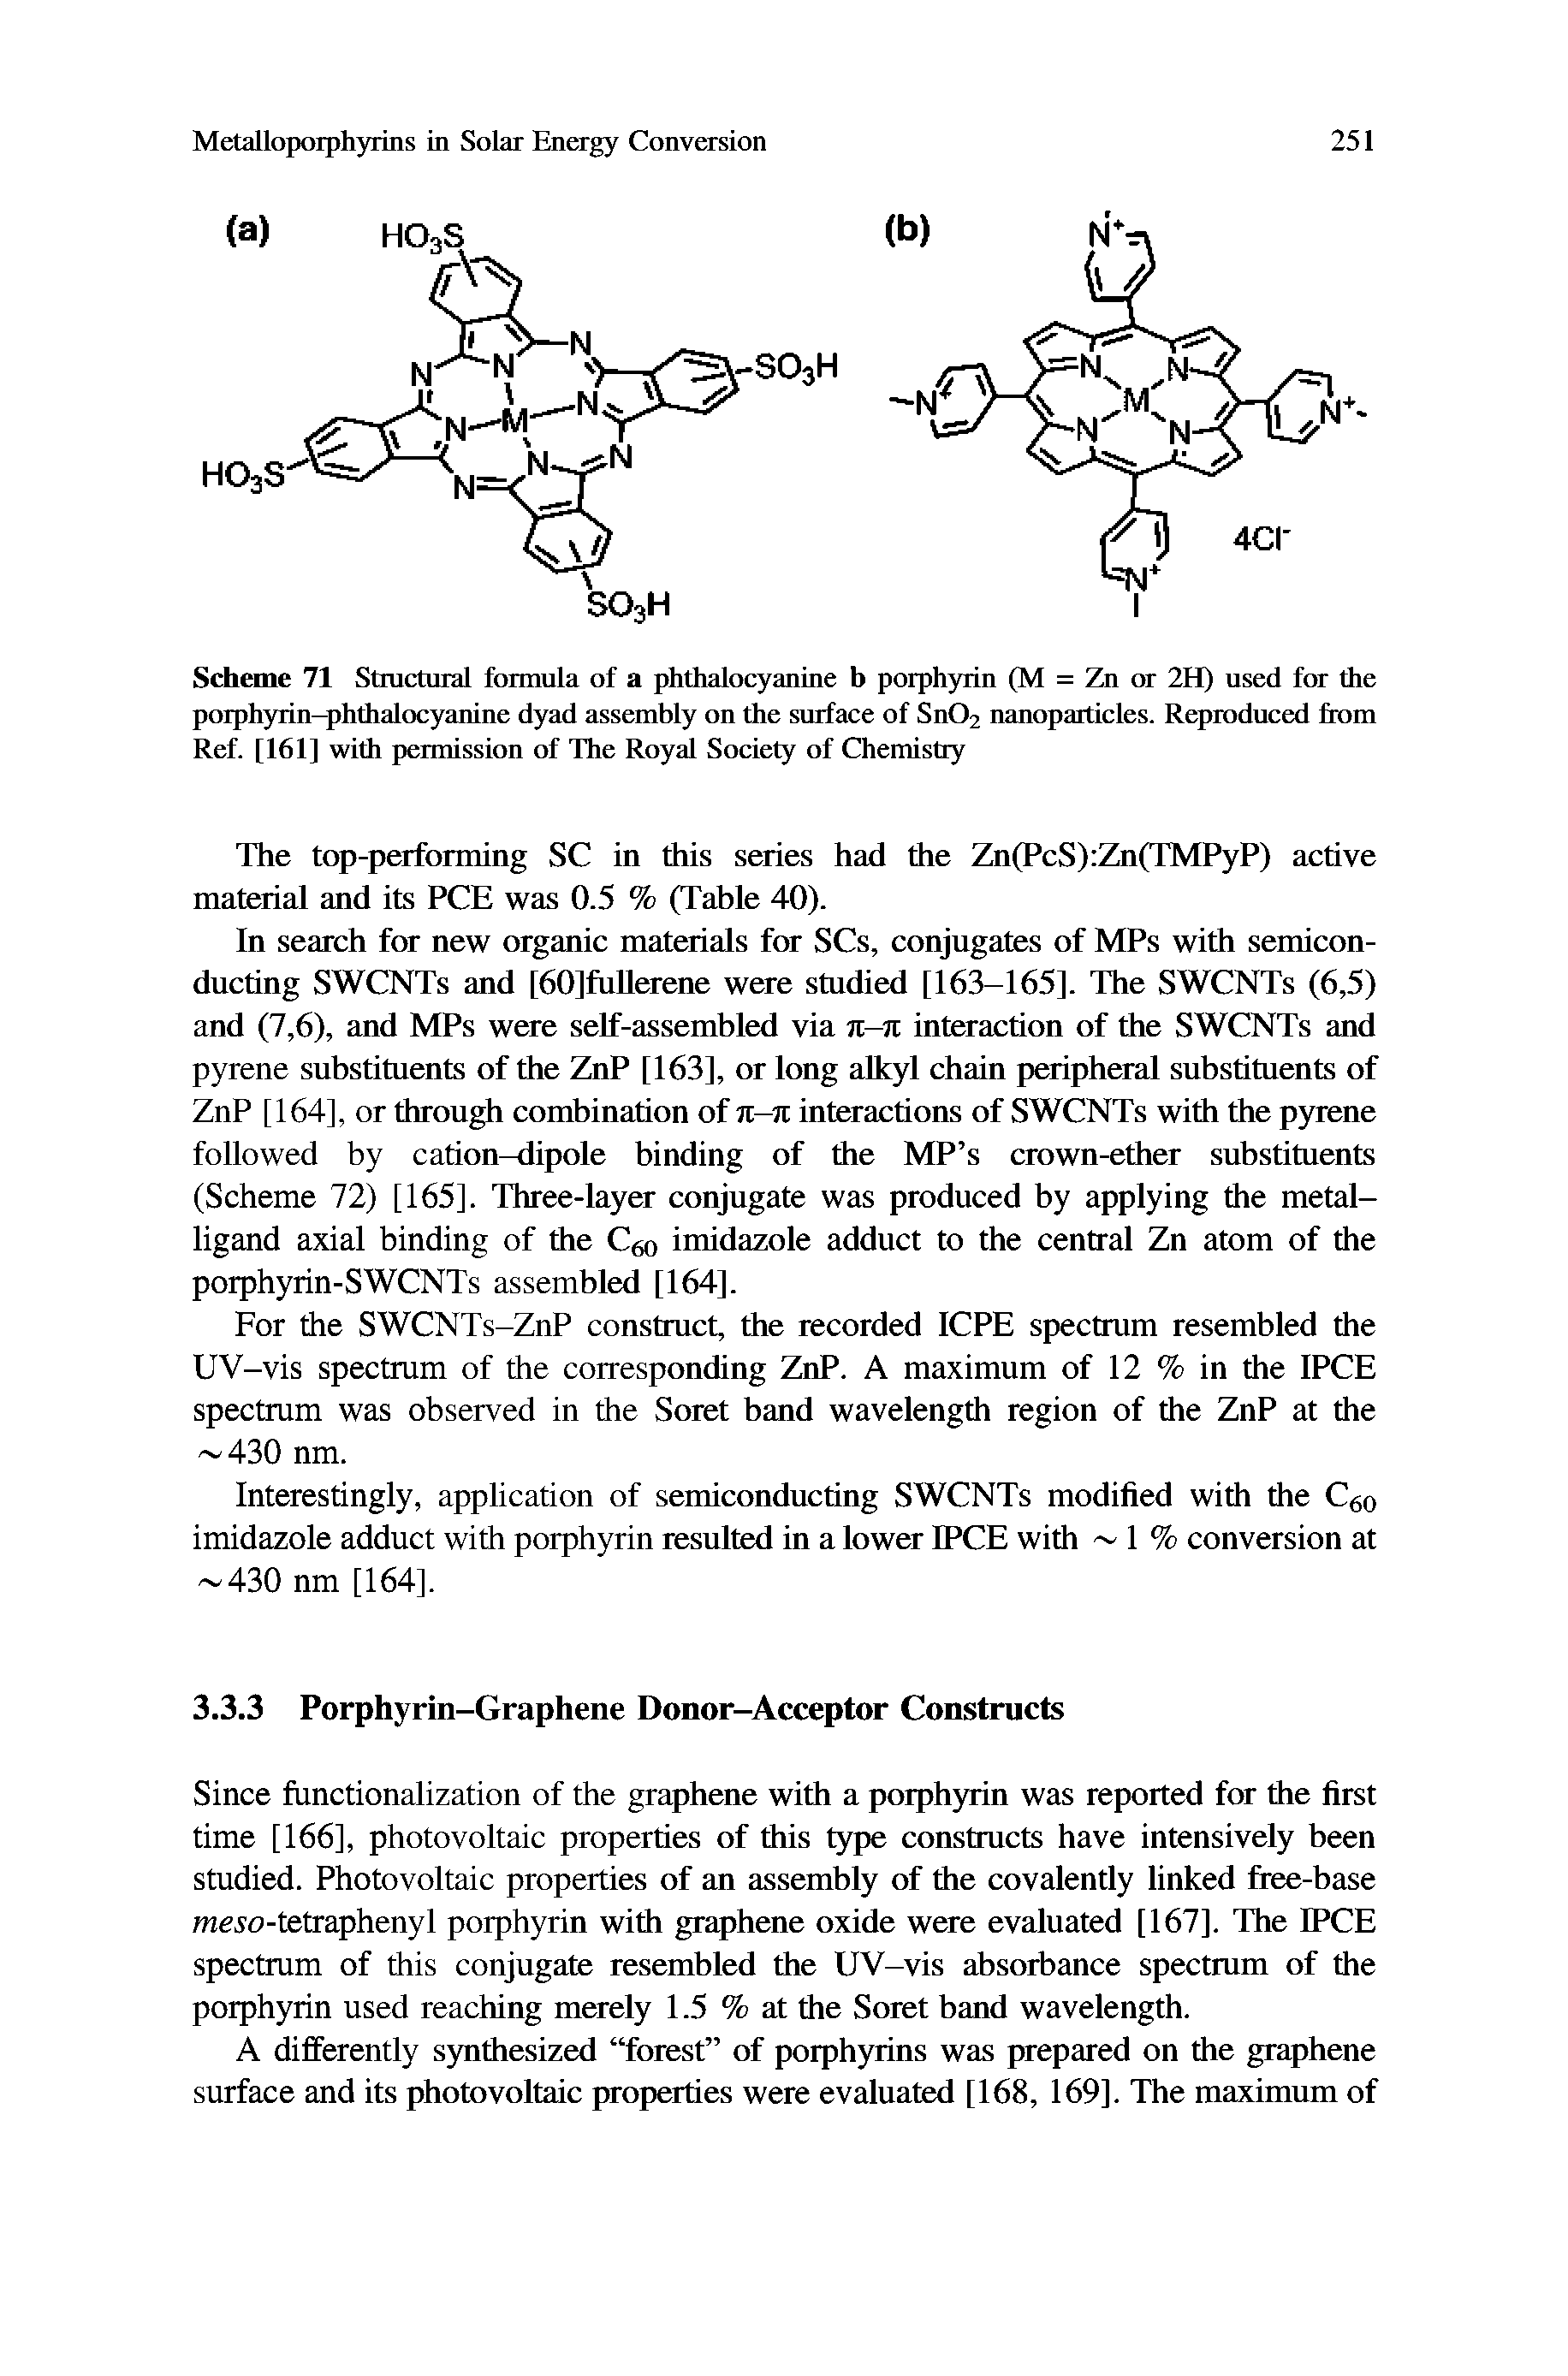 Scheme 71 Stmctural formula of a phthalocyanine b porphyrin (M = Zn or 2H) used for the porph5uin-phthalocyanine dyad assembly on the surface of Sn02 nanoparticles. Reproduced from Ref. [161] with permission of The Royal Society of Chemistry...